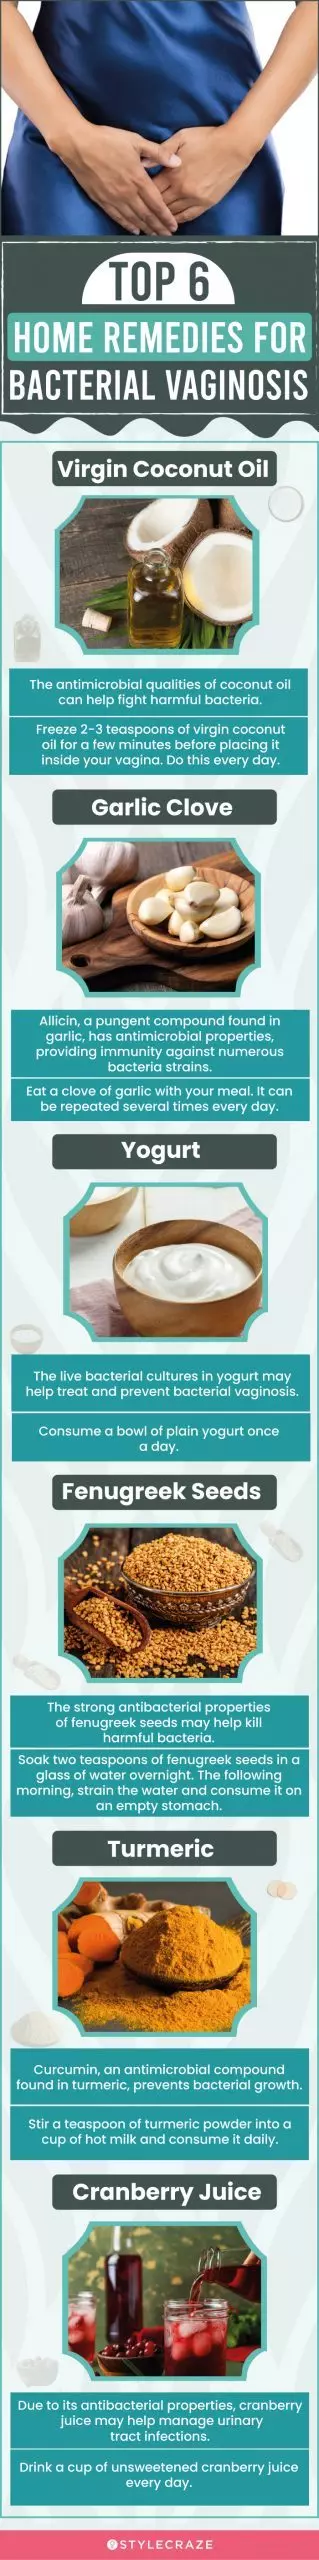 top 6 home remedies for bacterial vaginosis (infographic)